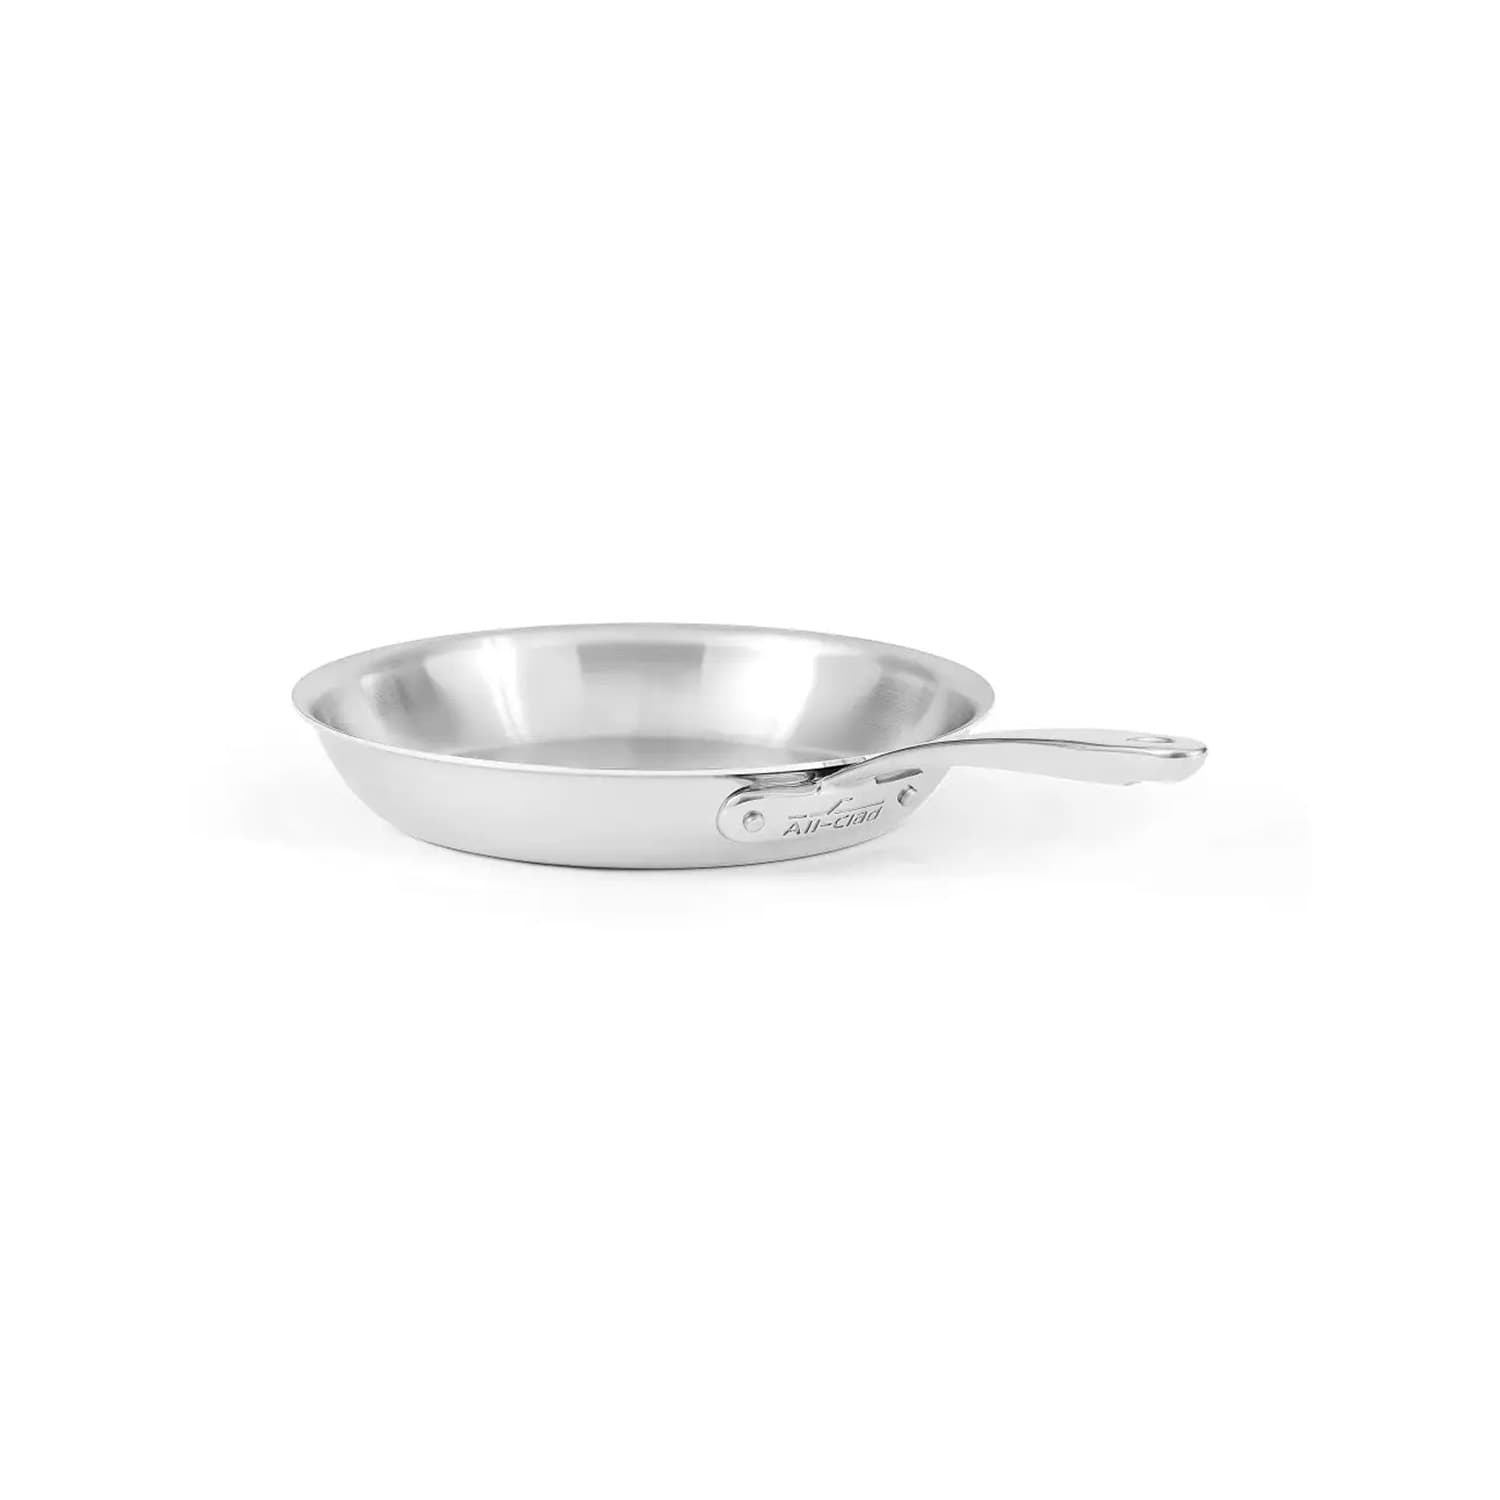 All-Clad D5 Polished 5-Ply 8 inch Non-Stick Fry